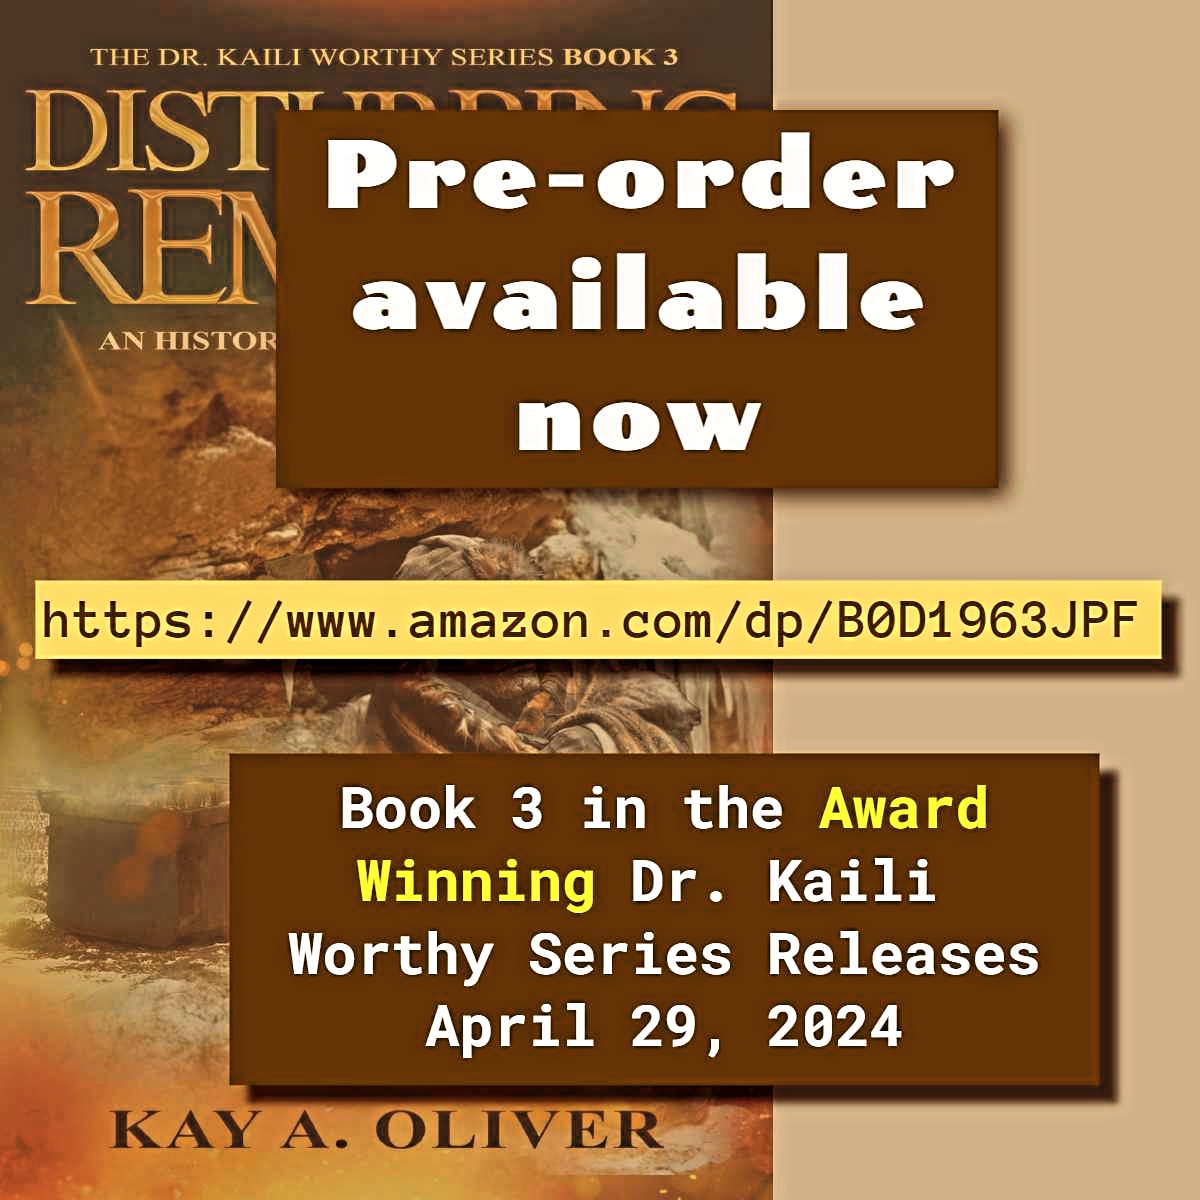 @dw_harvey @JessSFrankel The journey continues. Based on book of the year 2022, the 3rd book in the series will be released April 29th. #preordernow 
httos://amazon.com/dp/B0D1963JPF